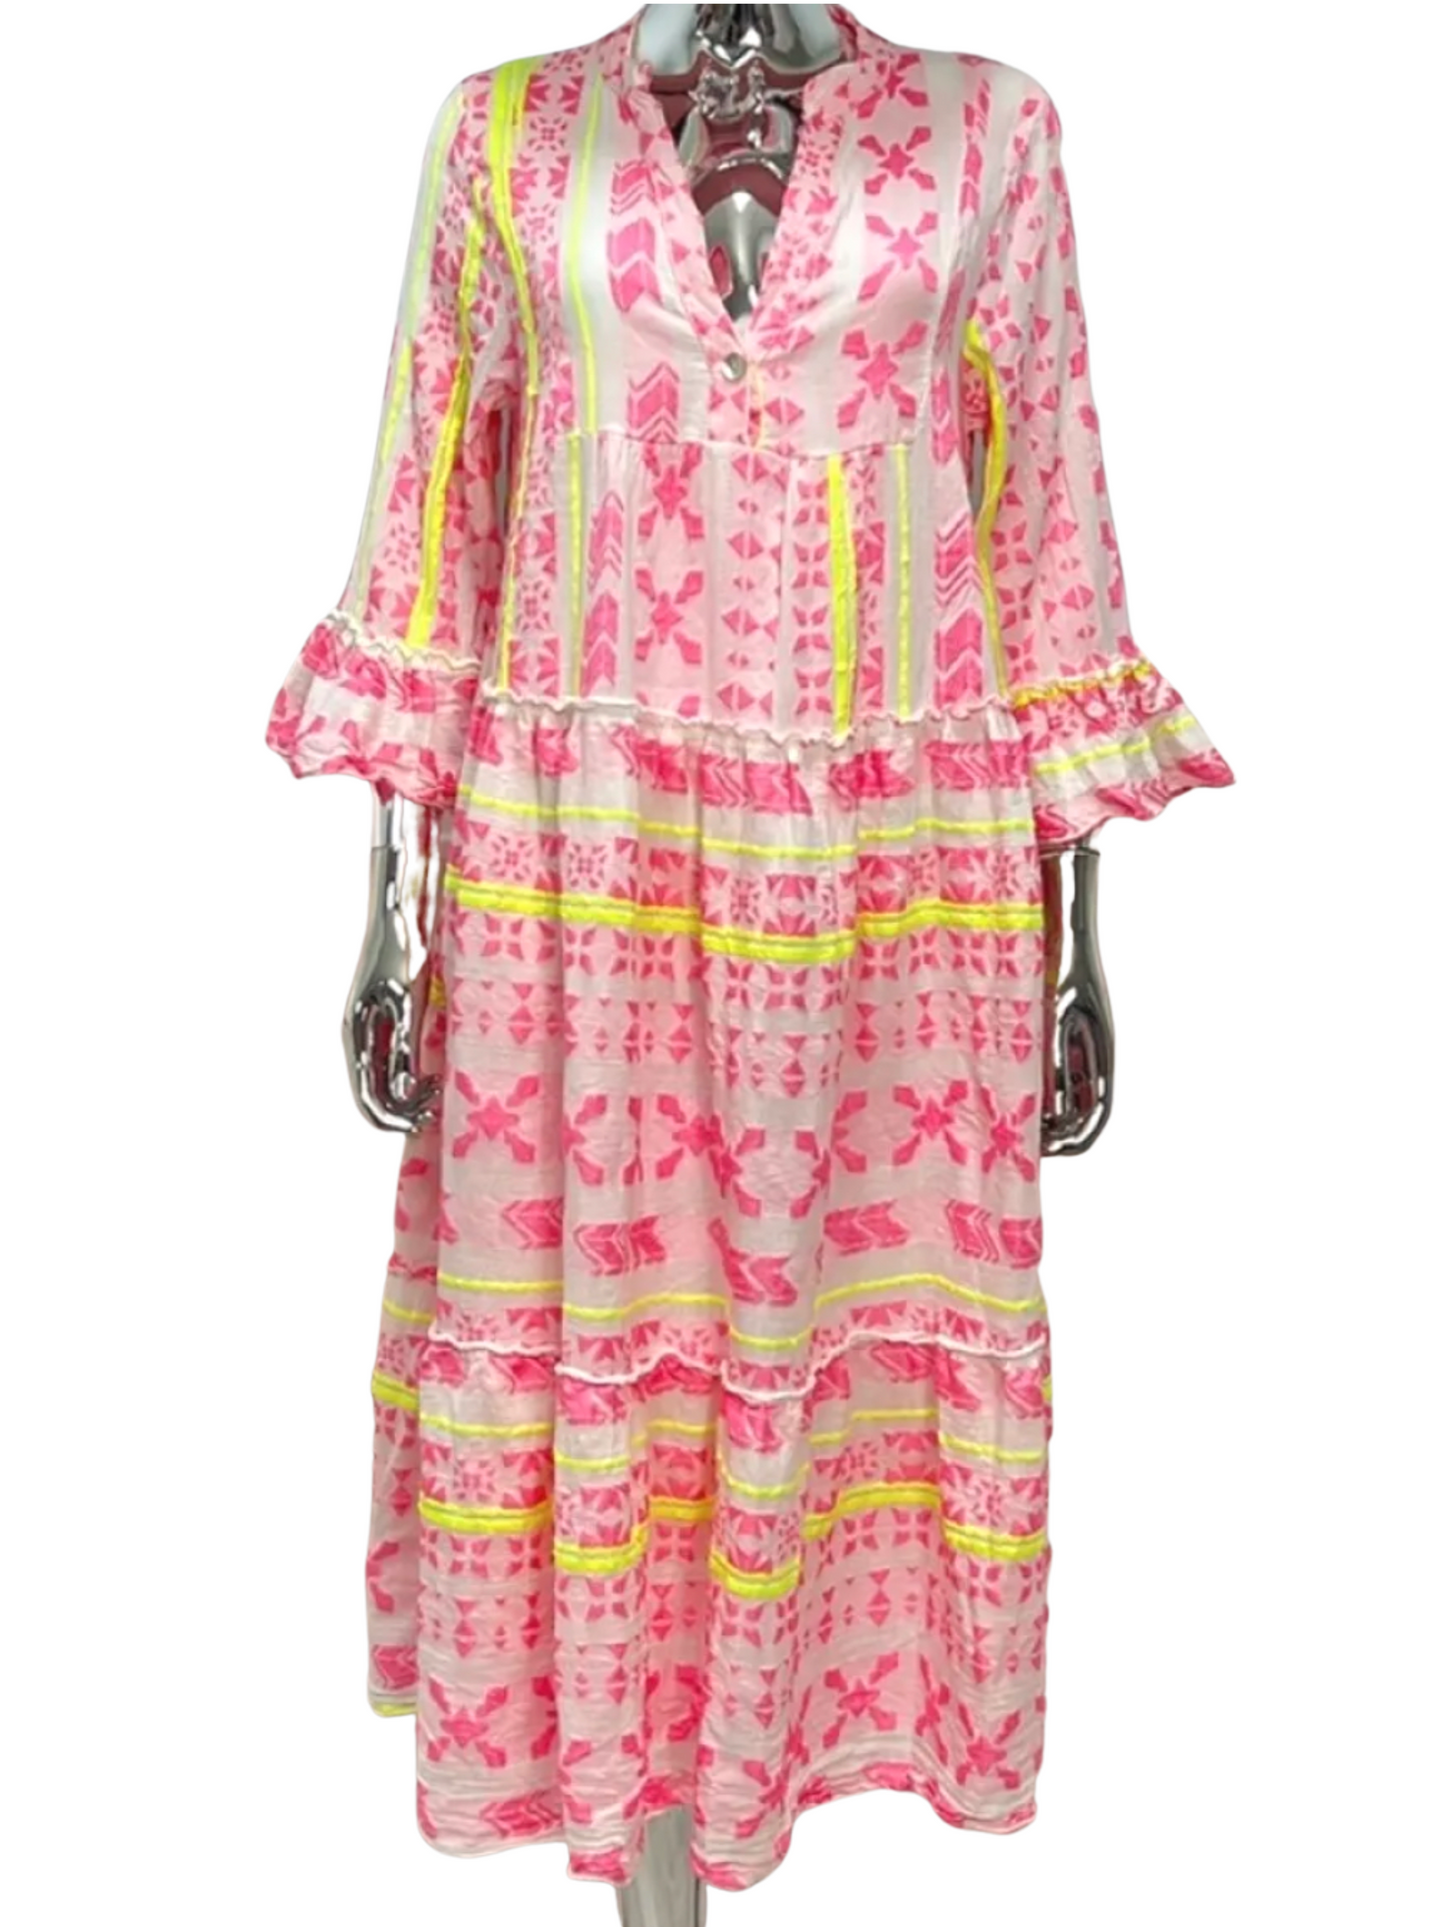 Neon Embroidered Aztec Maxi Dress